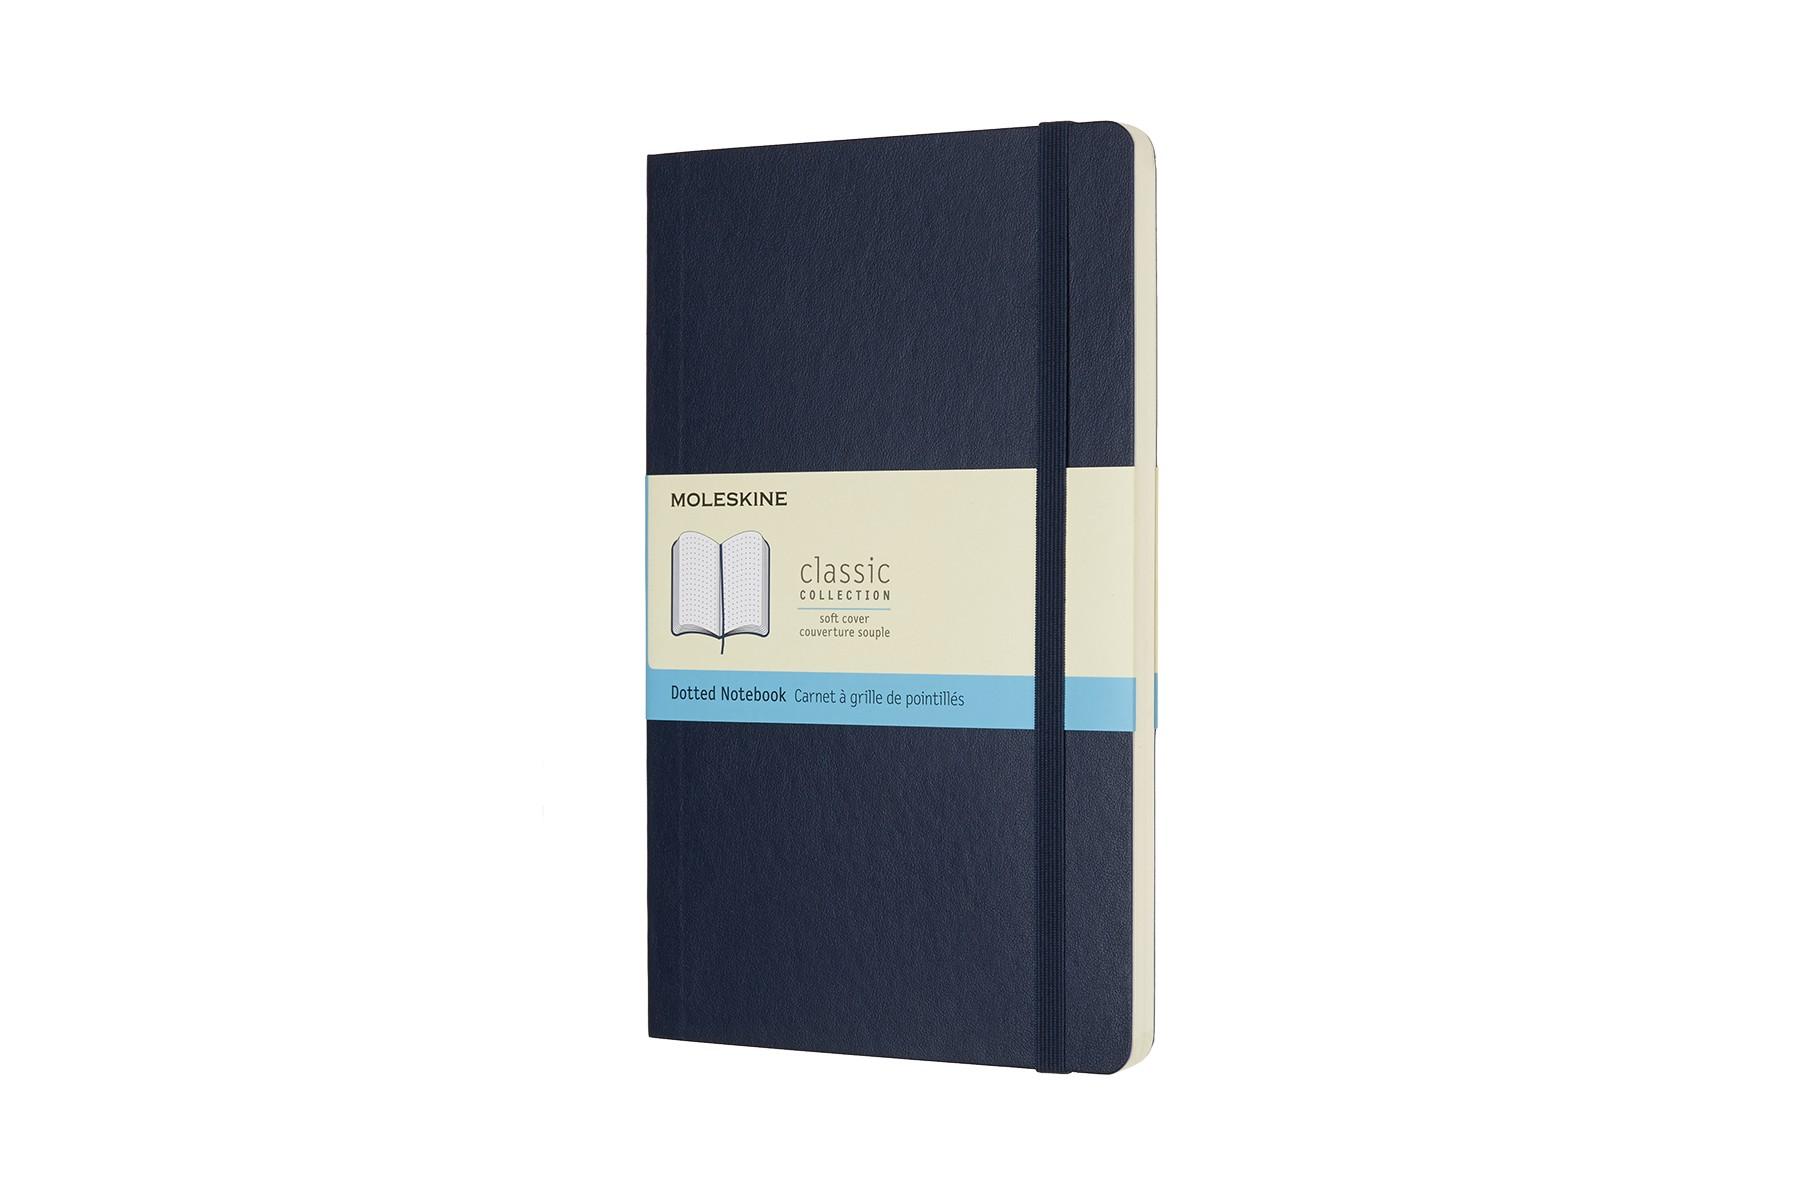 Moleskine Notebook Large Dotted, Sapphire Blue